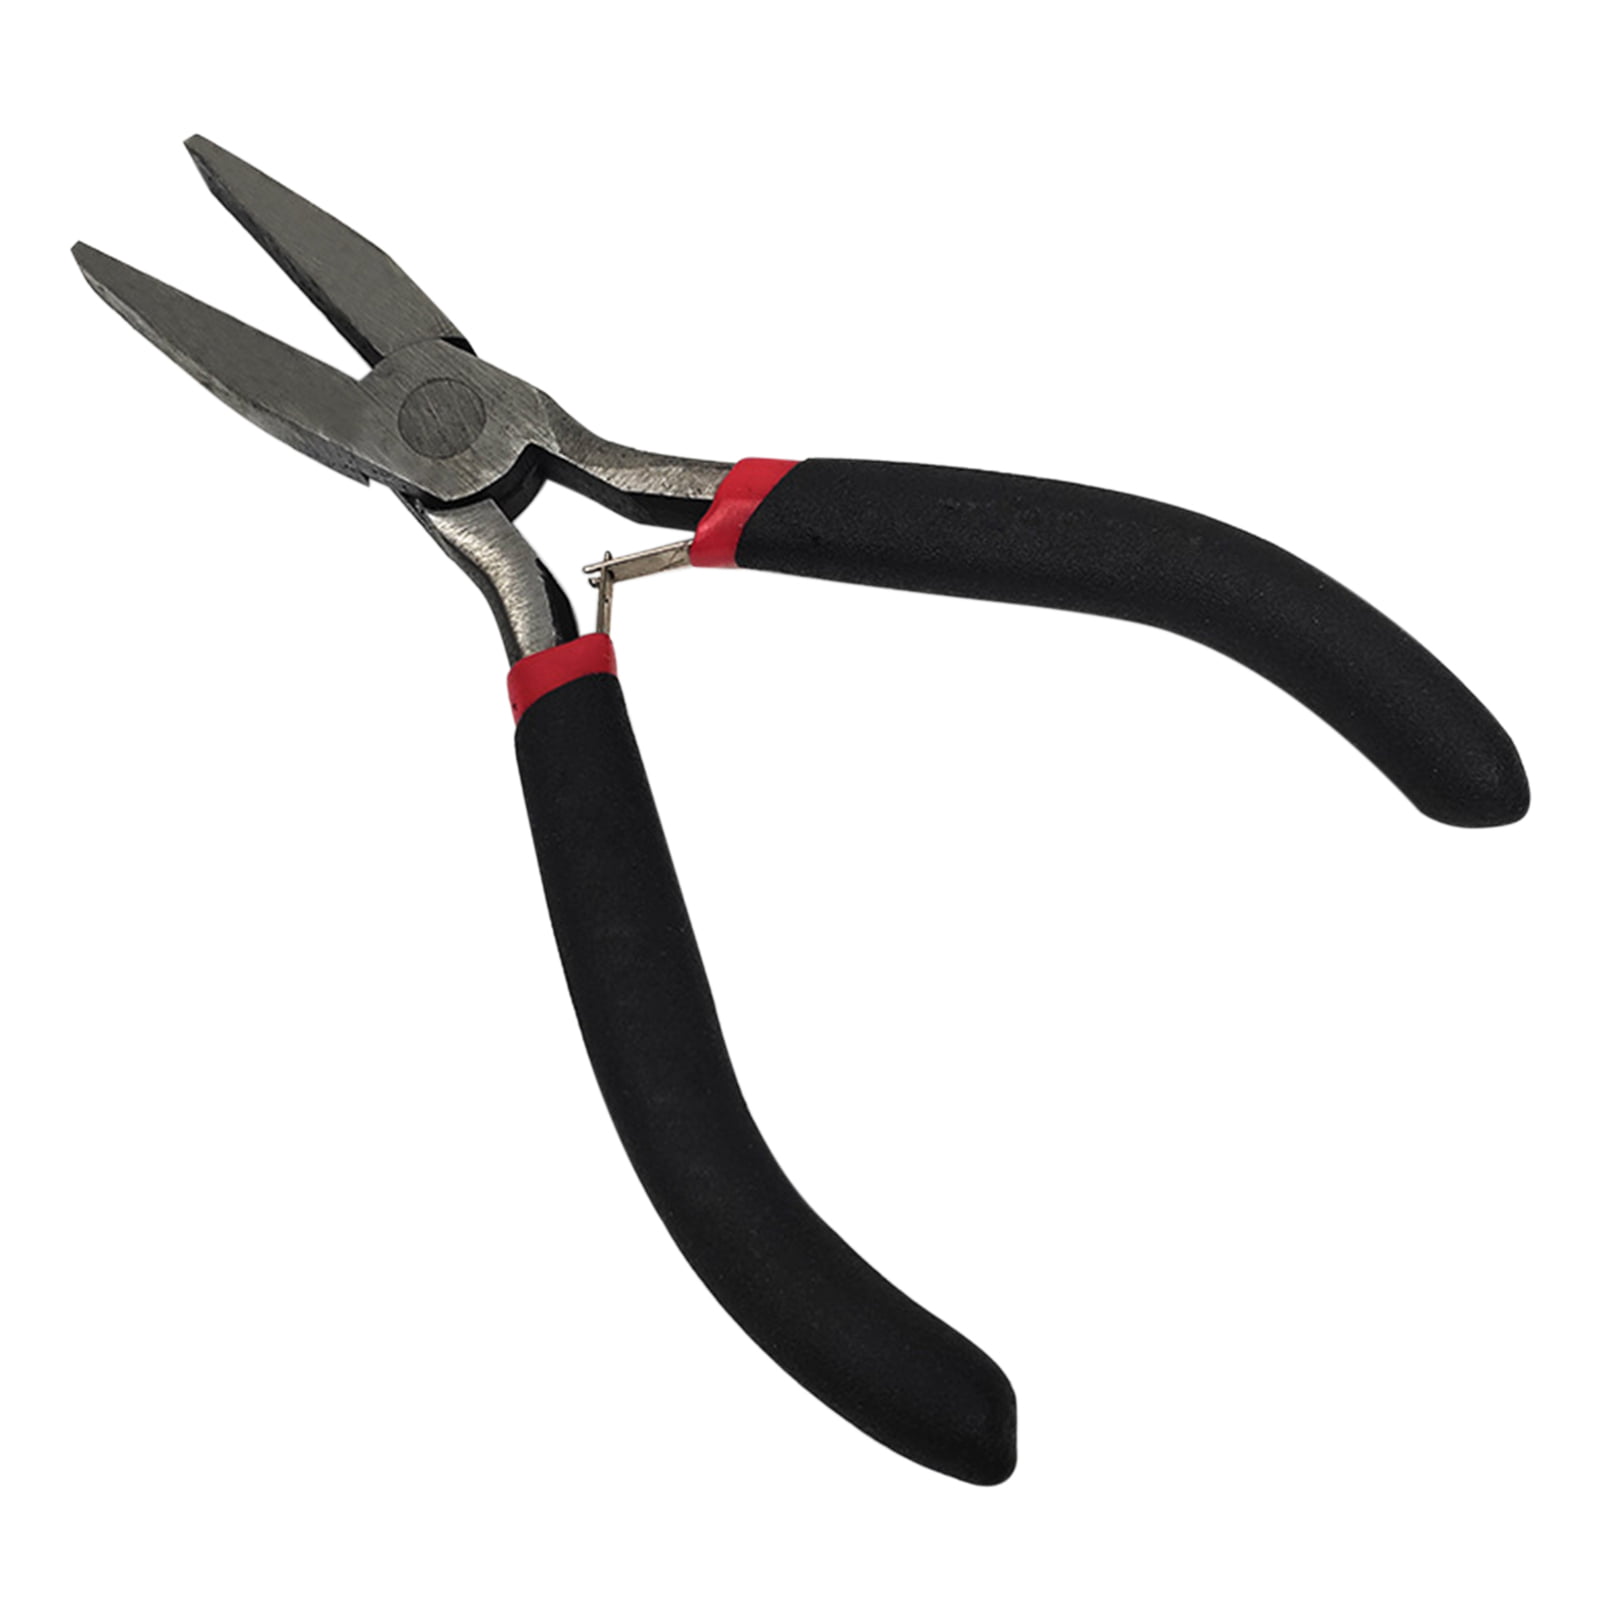 Box 5 Inch Flat Nose Pliers With Comfort Rubber Grip Jewelry Making Handcraft 